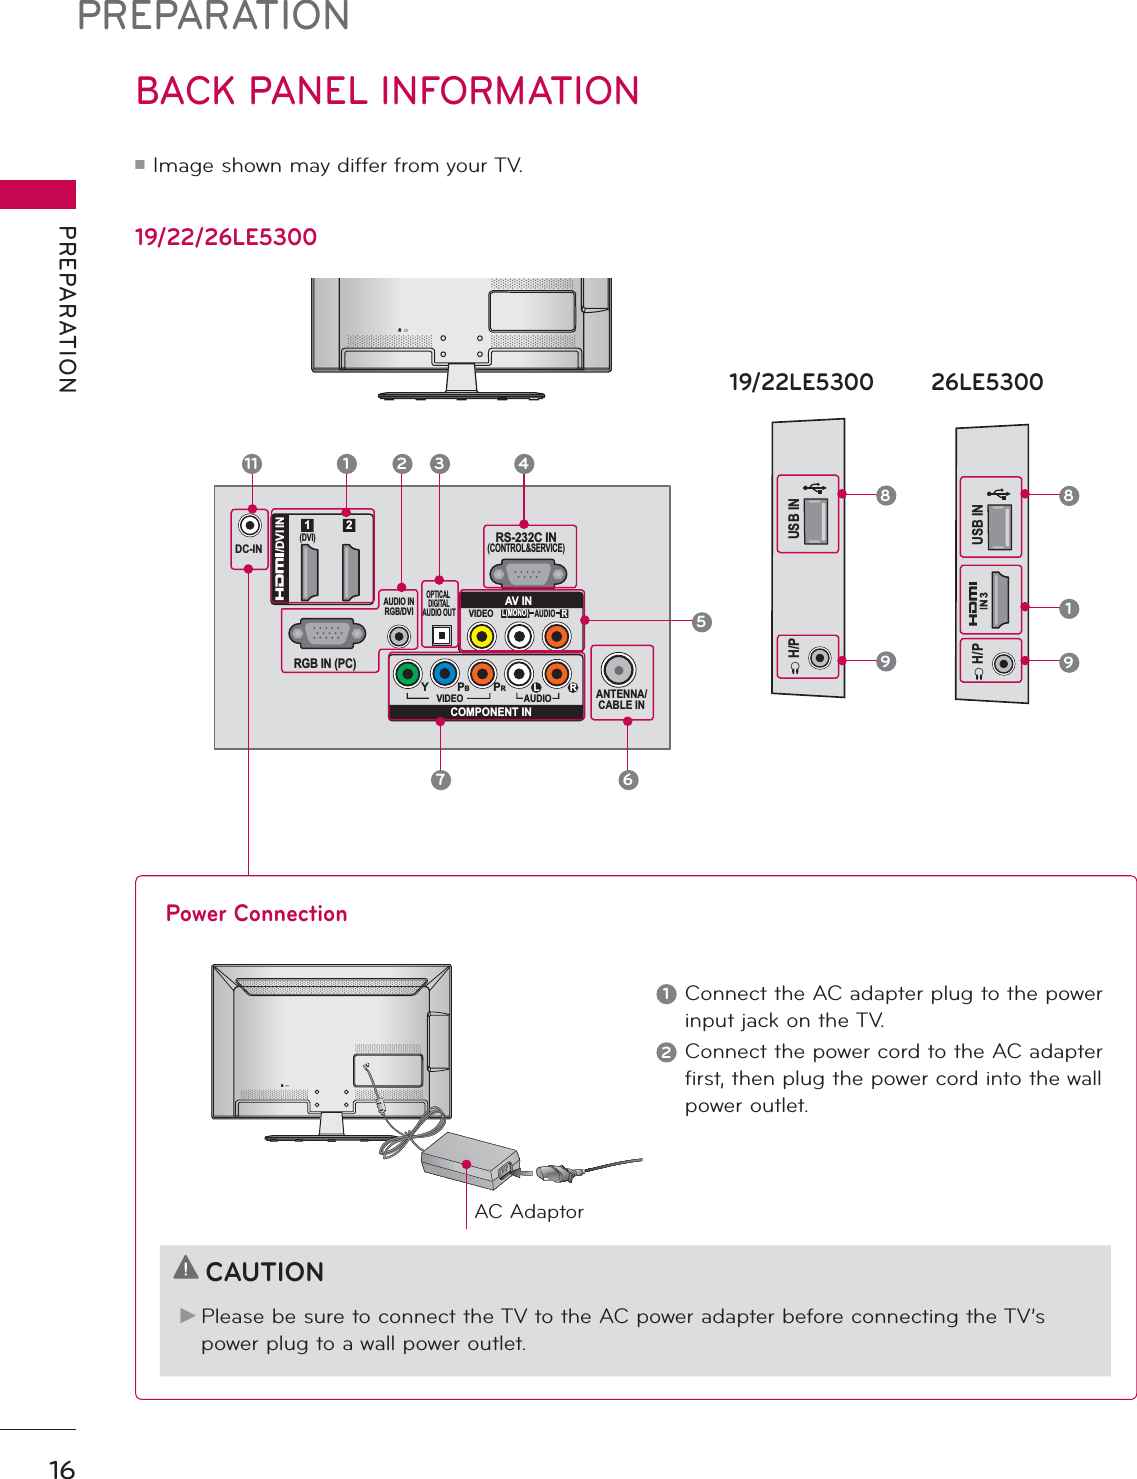 PREPARATIONPREPARATION16BACK PANEL INFORMATION᫶Image shown may differ from your TV.19/22/26LE530019/22LE5300 26LE5300H/P USB INH/P USB ININ 388919ANTENNA/CABLE INDC-INRGB IN (PC)AUDIO INRGB/DVI(DVI)OPTICAL DIGITALAUDIO OUT/DVI INVIDEOAUDIOL(MONO)RVIDEO AUDIOYPBPRL RCOMPONENT INAV INRS-232C IN(CONTROL&amp;SERVICE)1 211 1 32 4567Power Connection1Connect the AC adapter plug to the power input jack on the TV.2Connect the power cord to the AC adapter first, then plug the power cord into the wall power outlet.CAUTIONŹ Please be sure to connect the TV to the AC power adapter before connecting the TV’s power plug to a wall power outlet.DC INDC INAC Adaptor